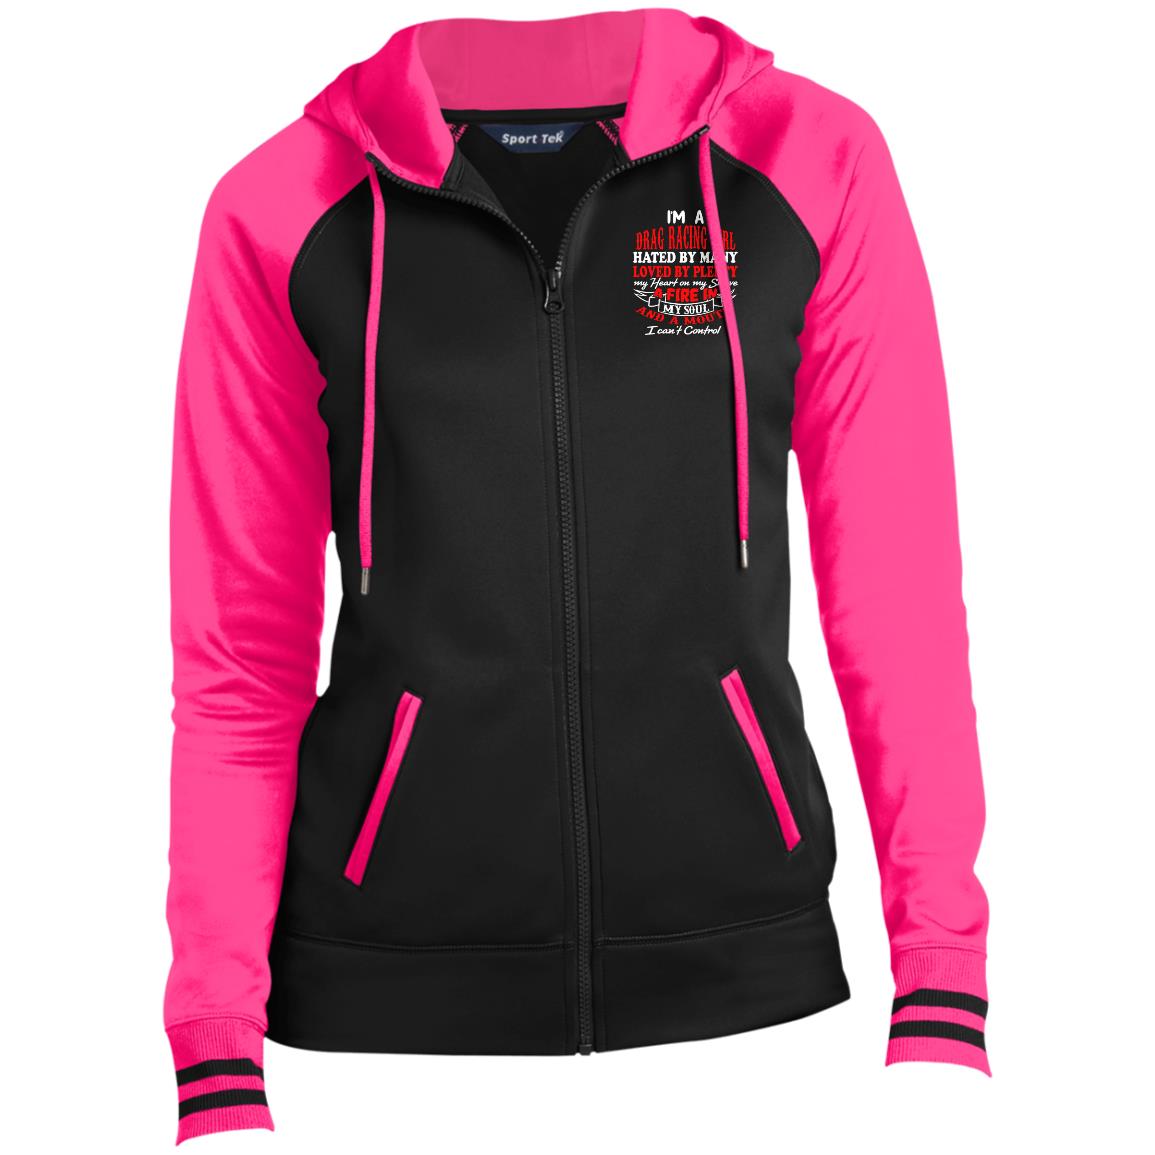 I'm A Drag Racing Girl Hated By Many Loved By Plenty Ladies' Sport-Wick® Full-Zip Hooded Jacket